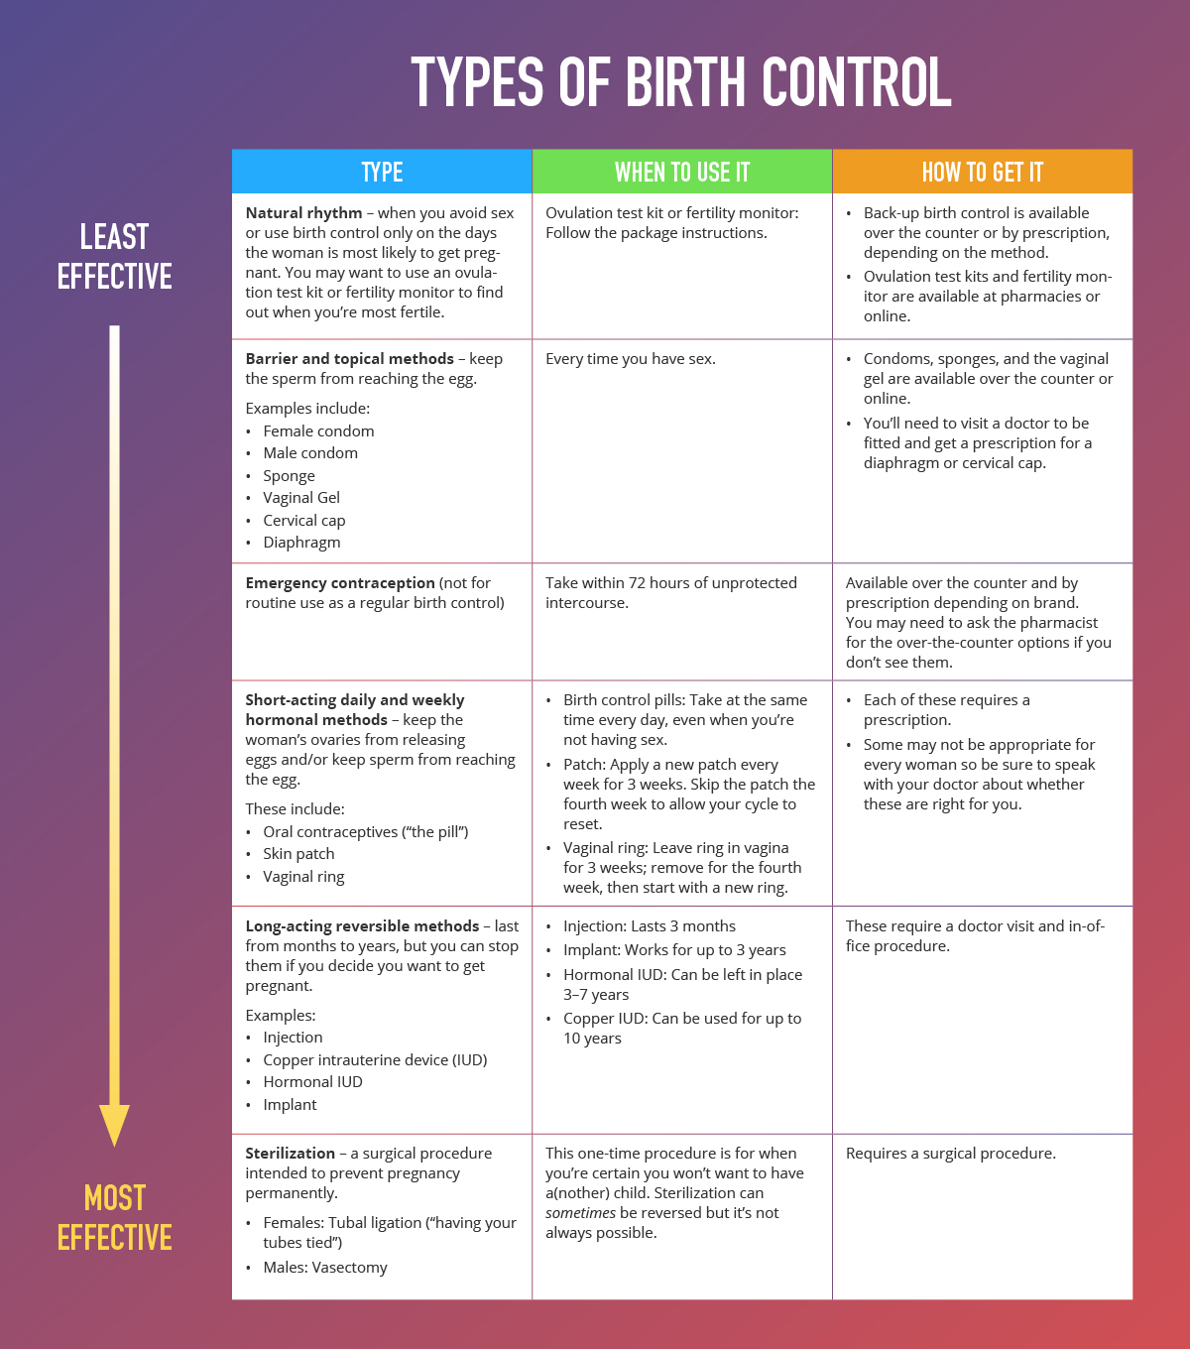 Types of birth control infographic